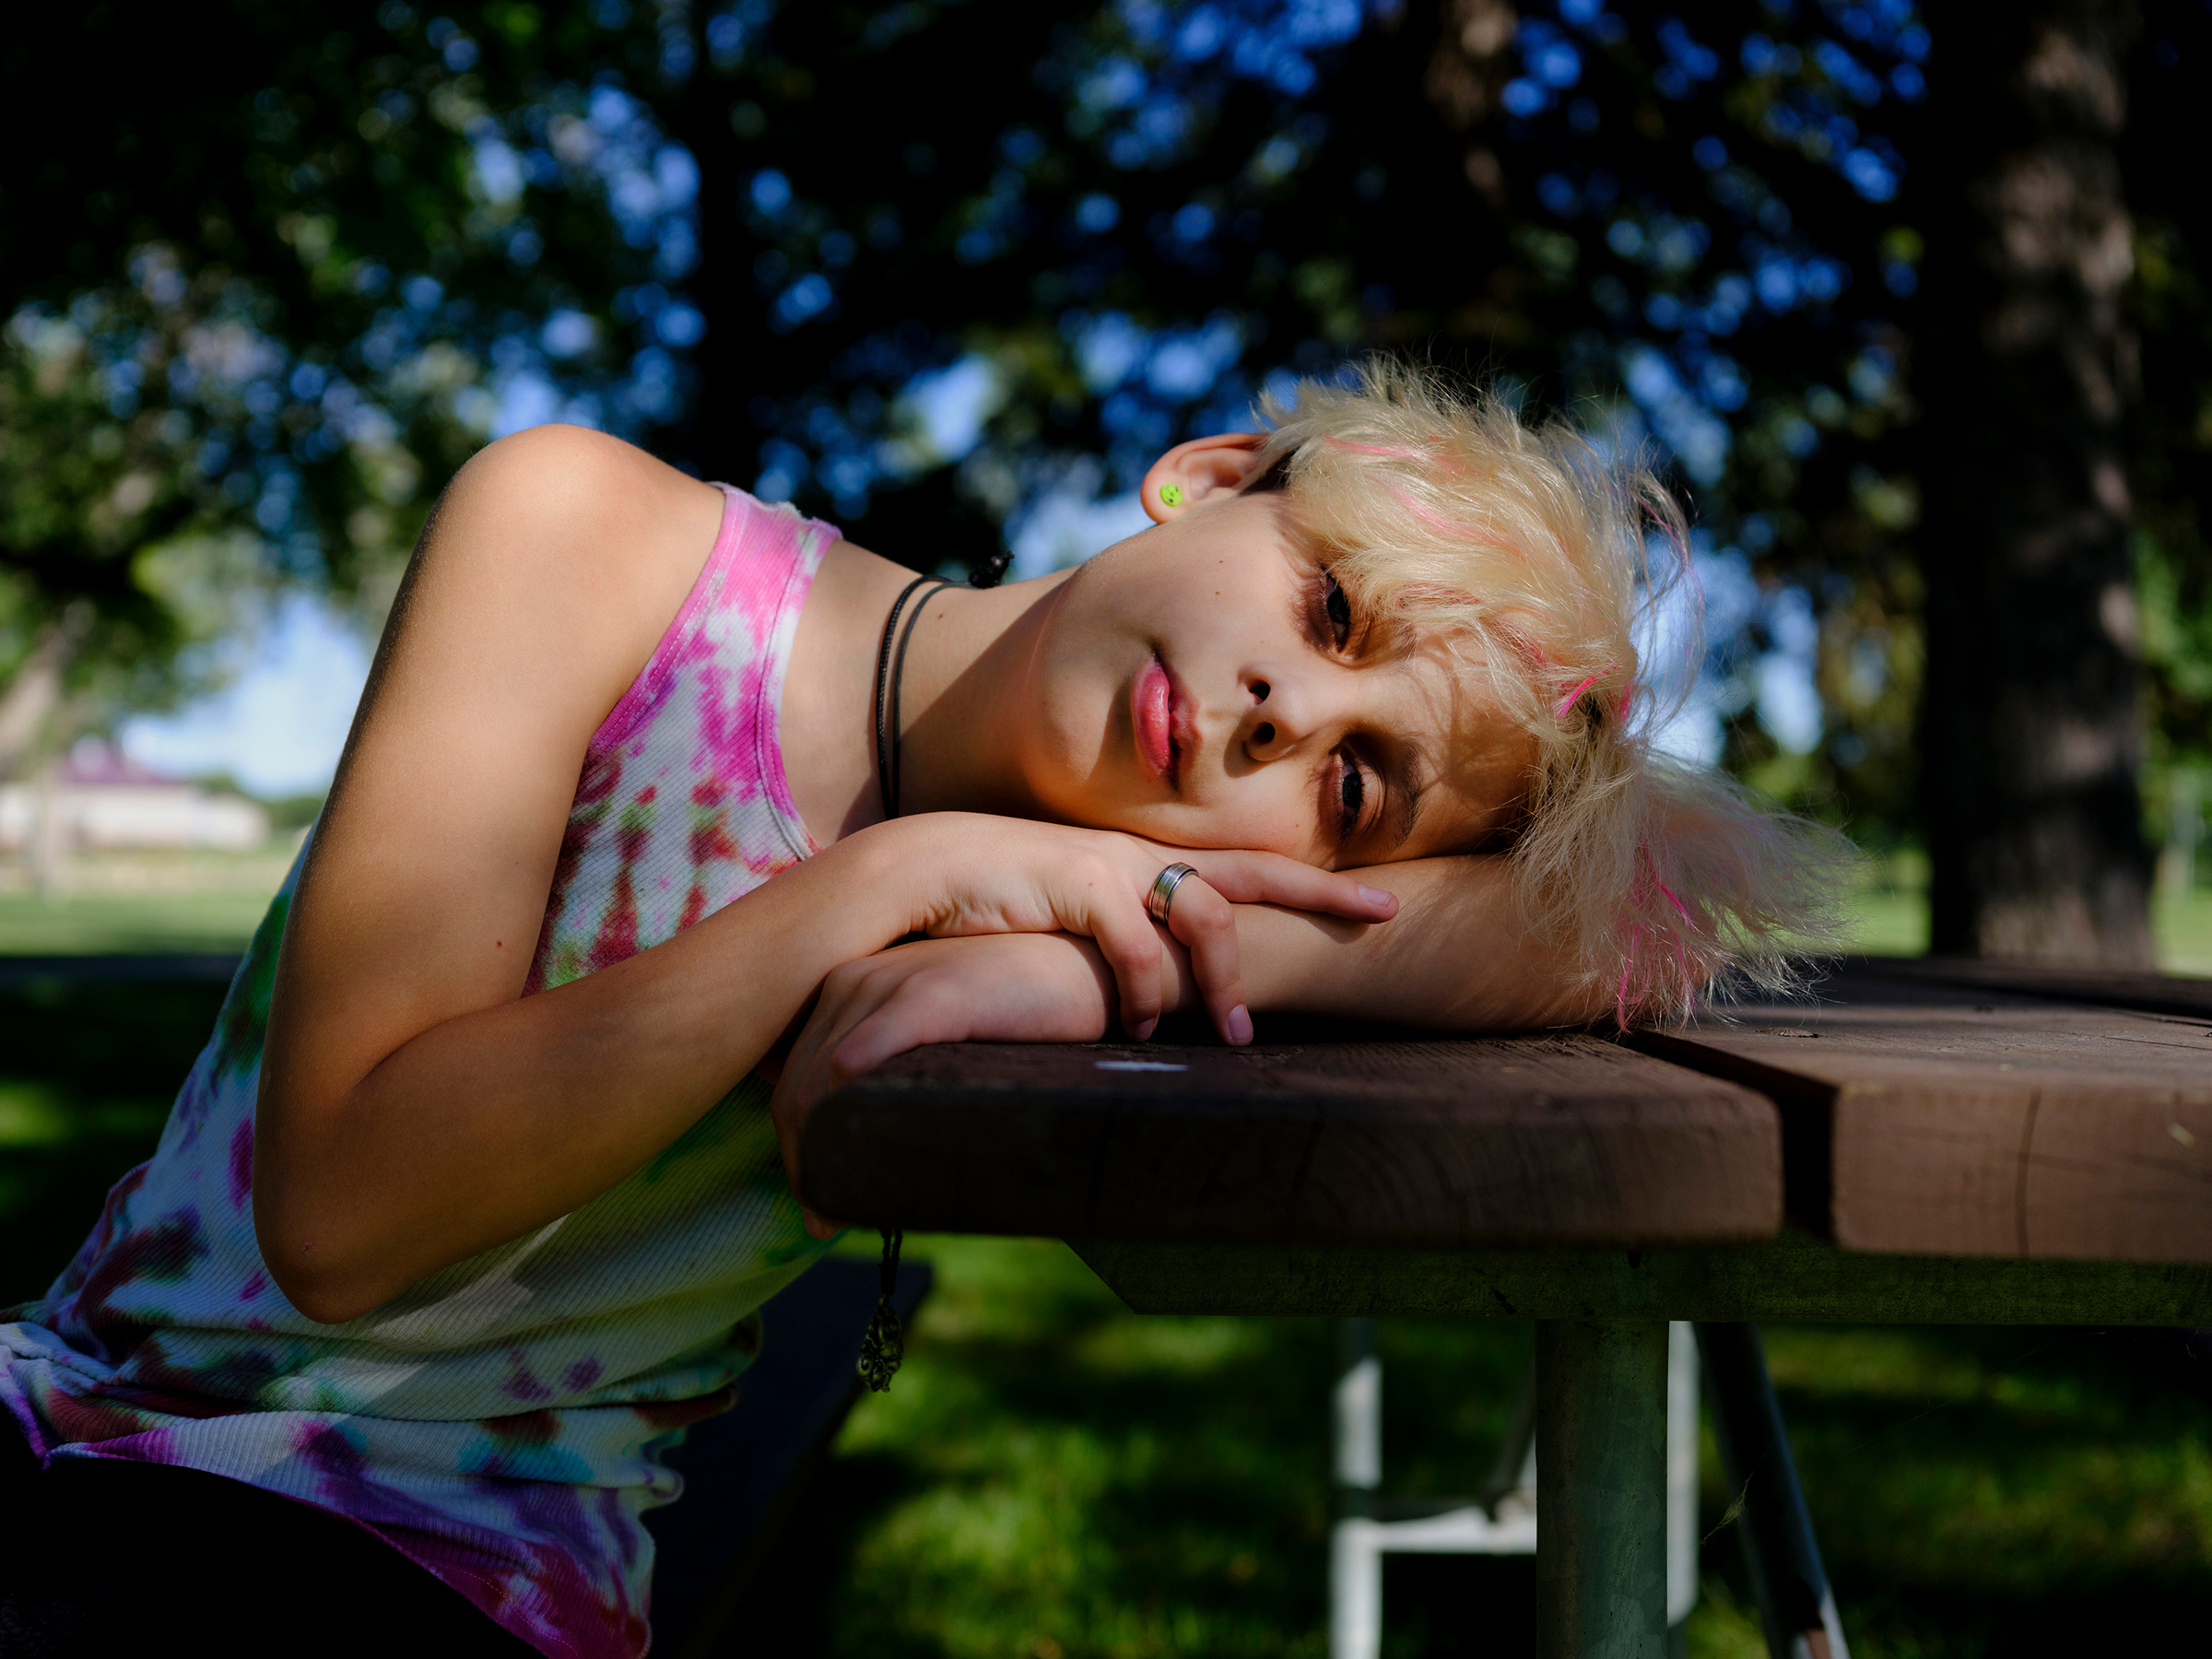 A Year in Photos of Gender Expansive Youth Across U.S Time